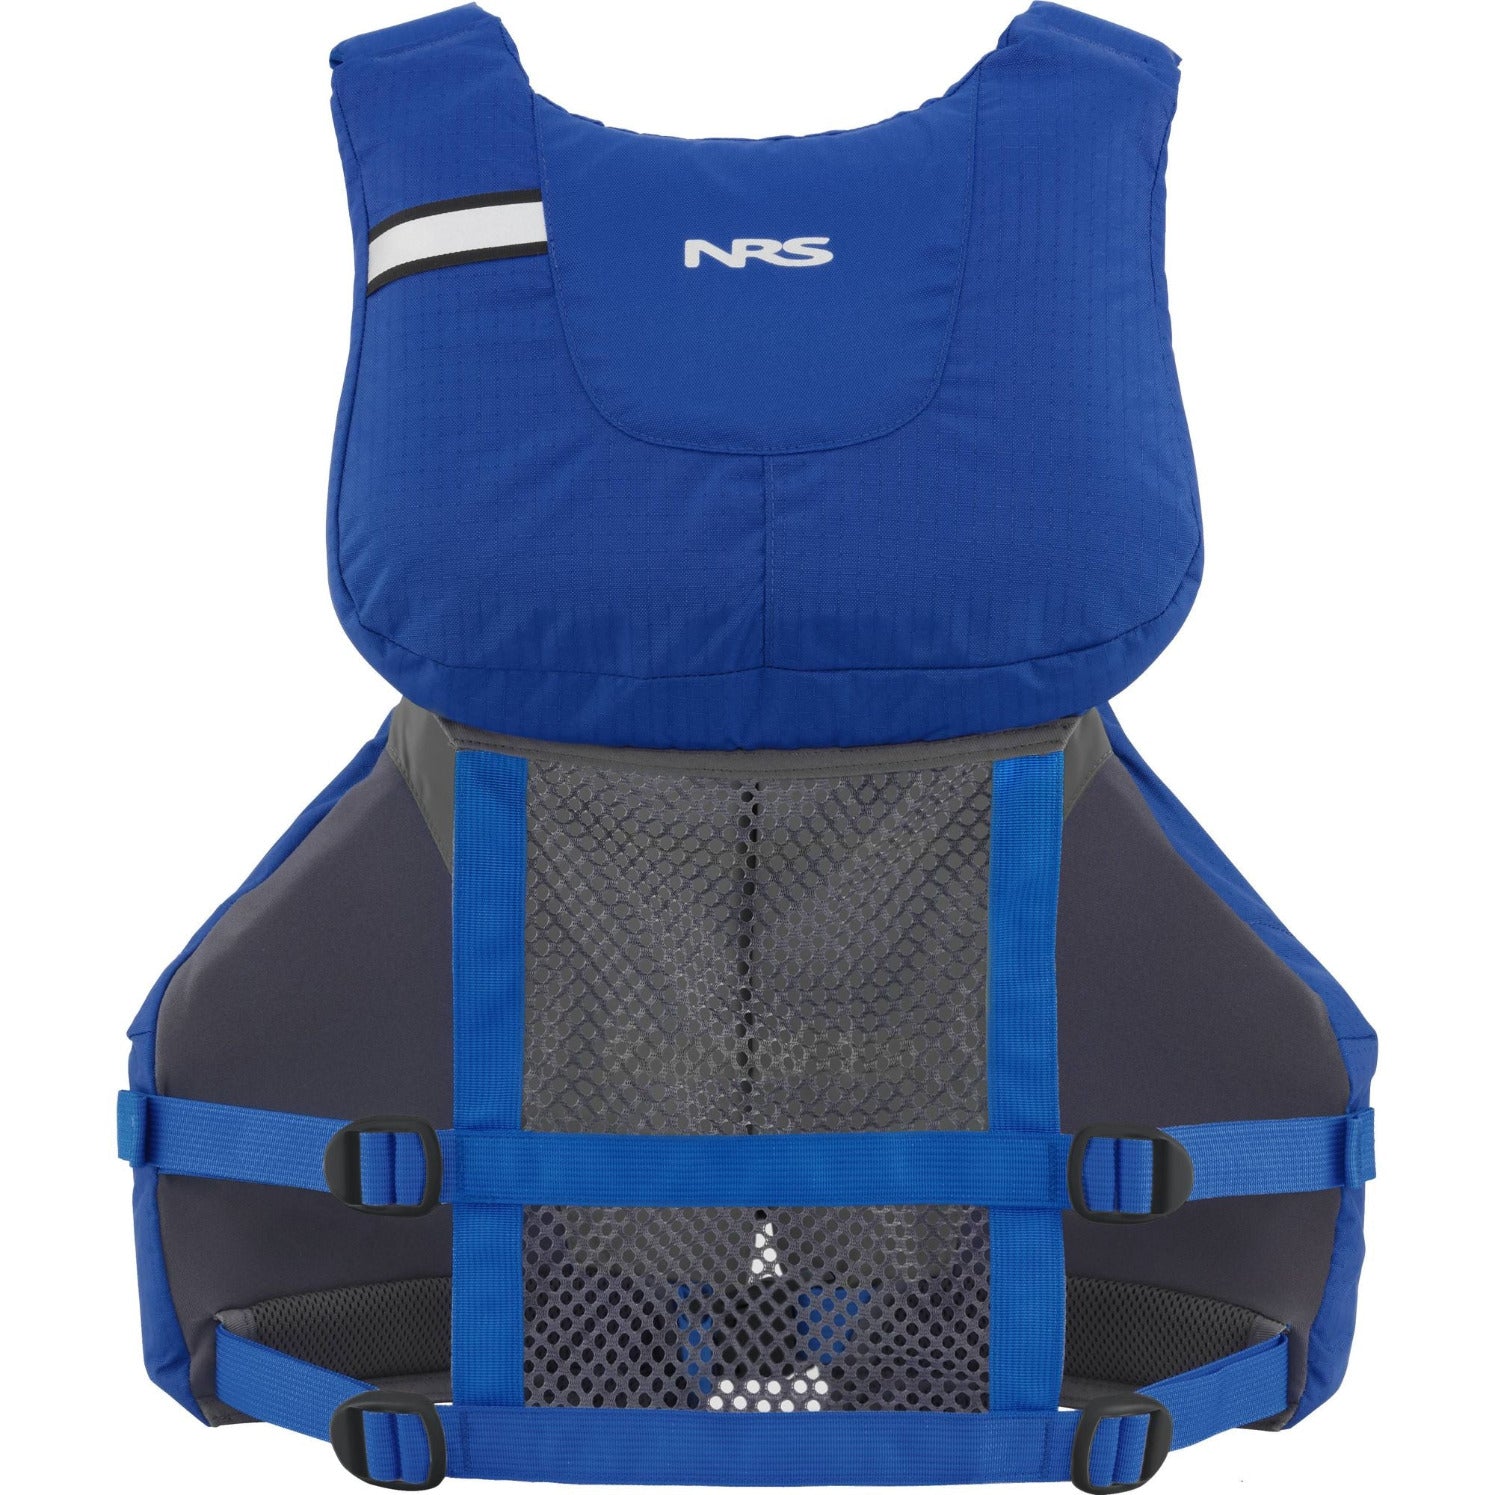 Rear view of the NRS Clearwater High Back Buoyancy Aids with mesh rear panel